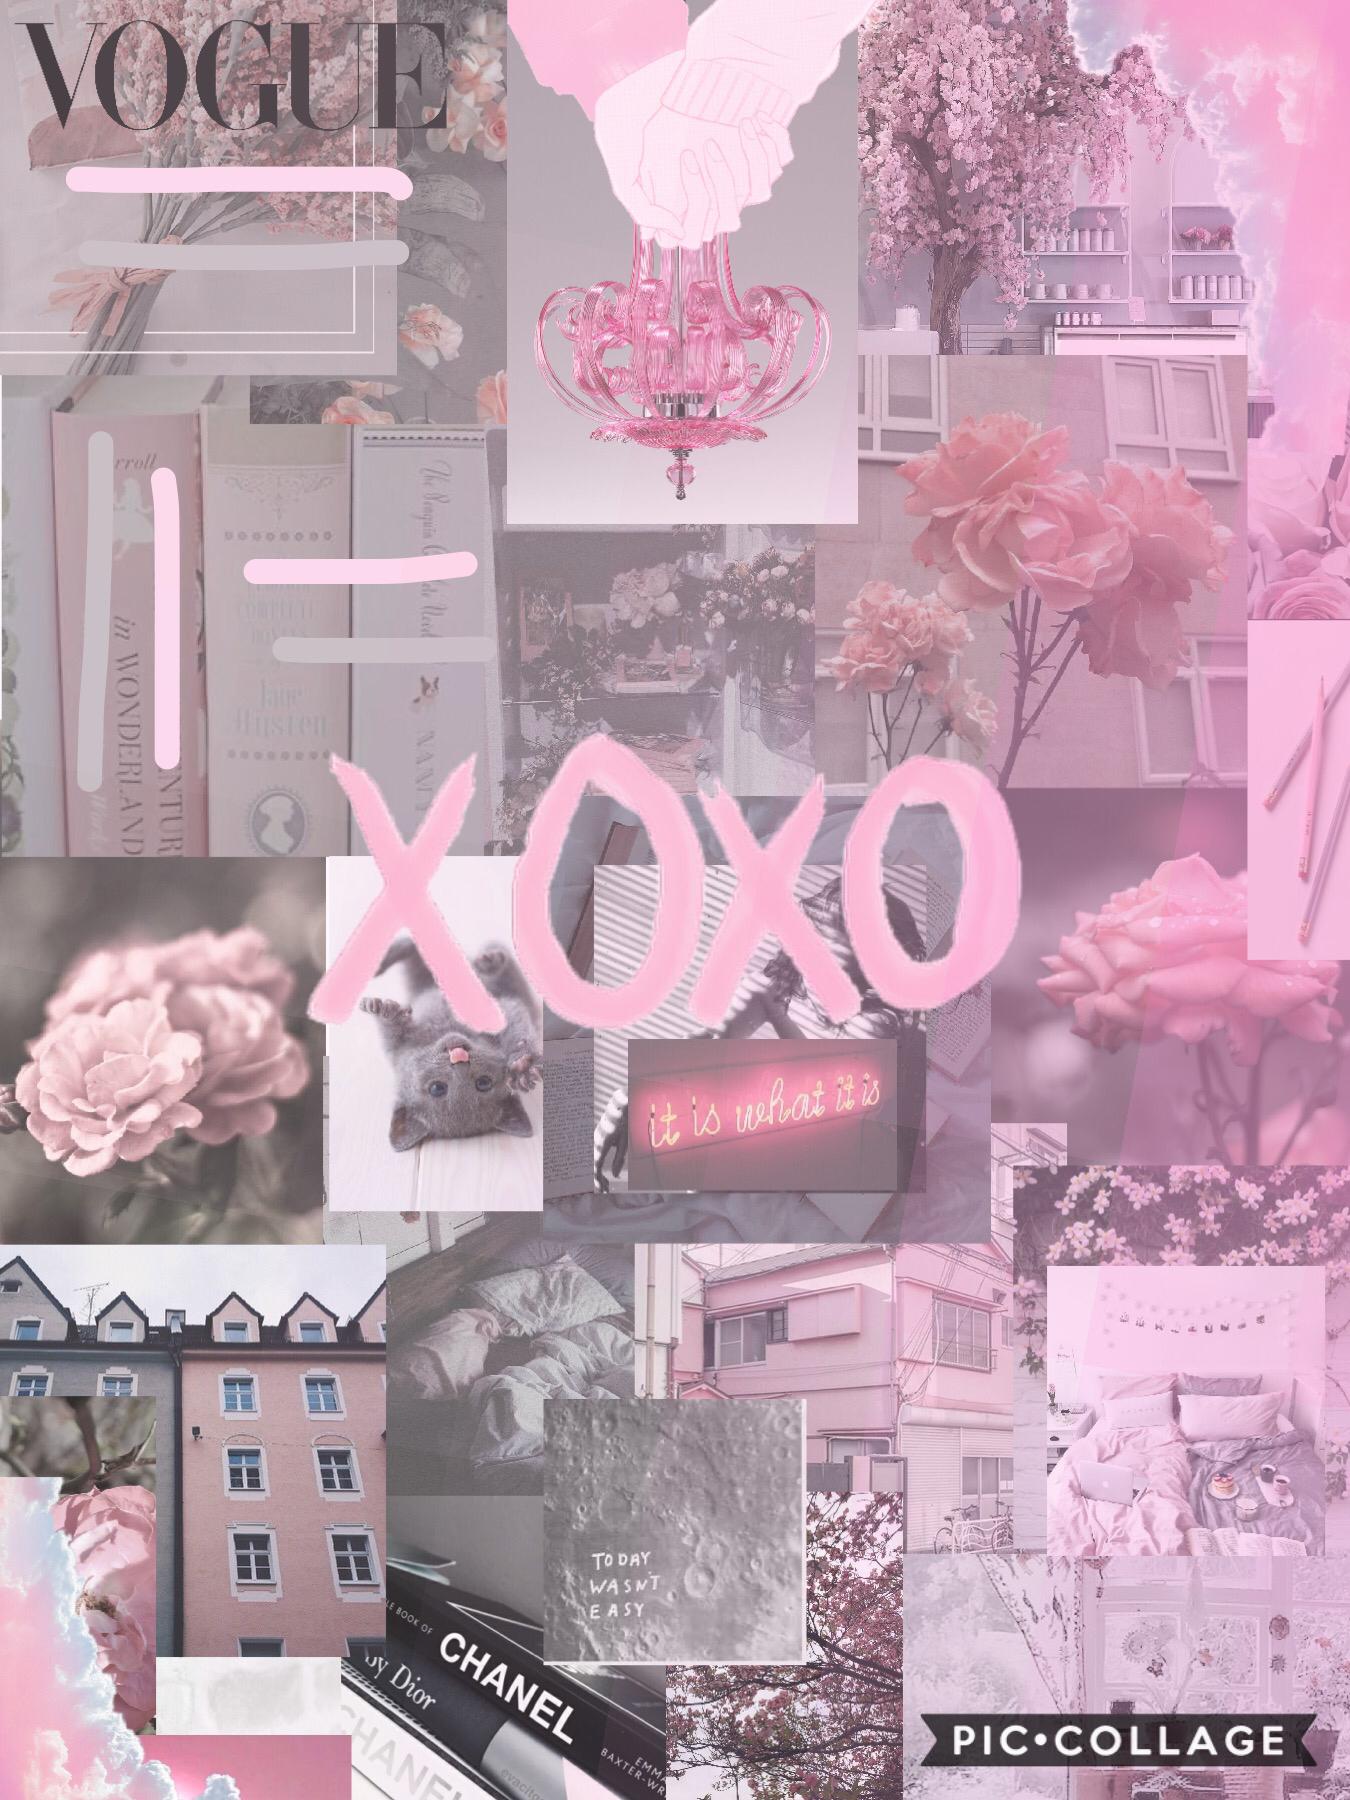 💋 tap 💋

To all those people I love, this is for you!!! 

“Xoxo” the phrase that changed everything-